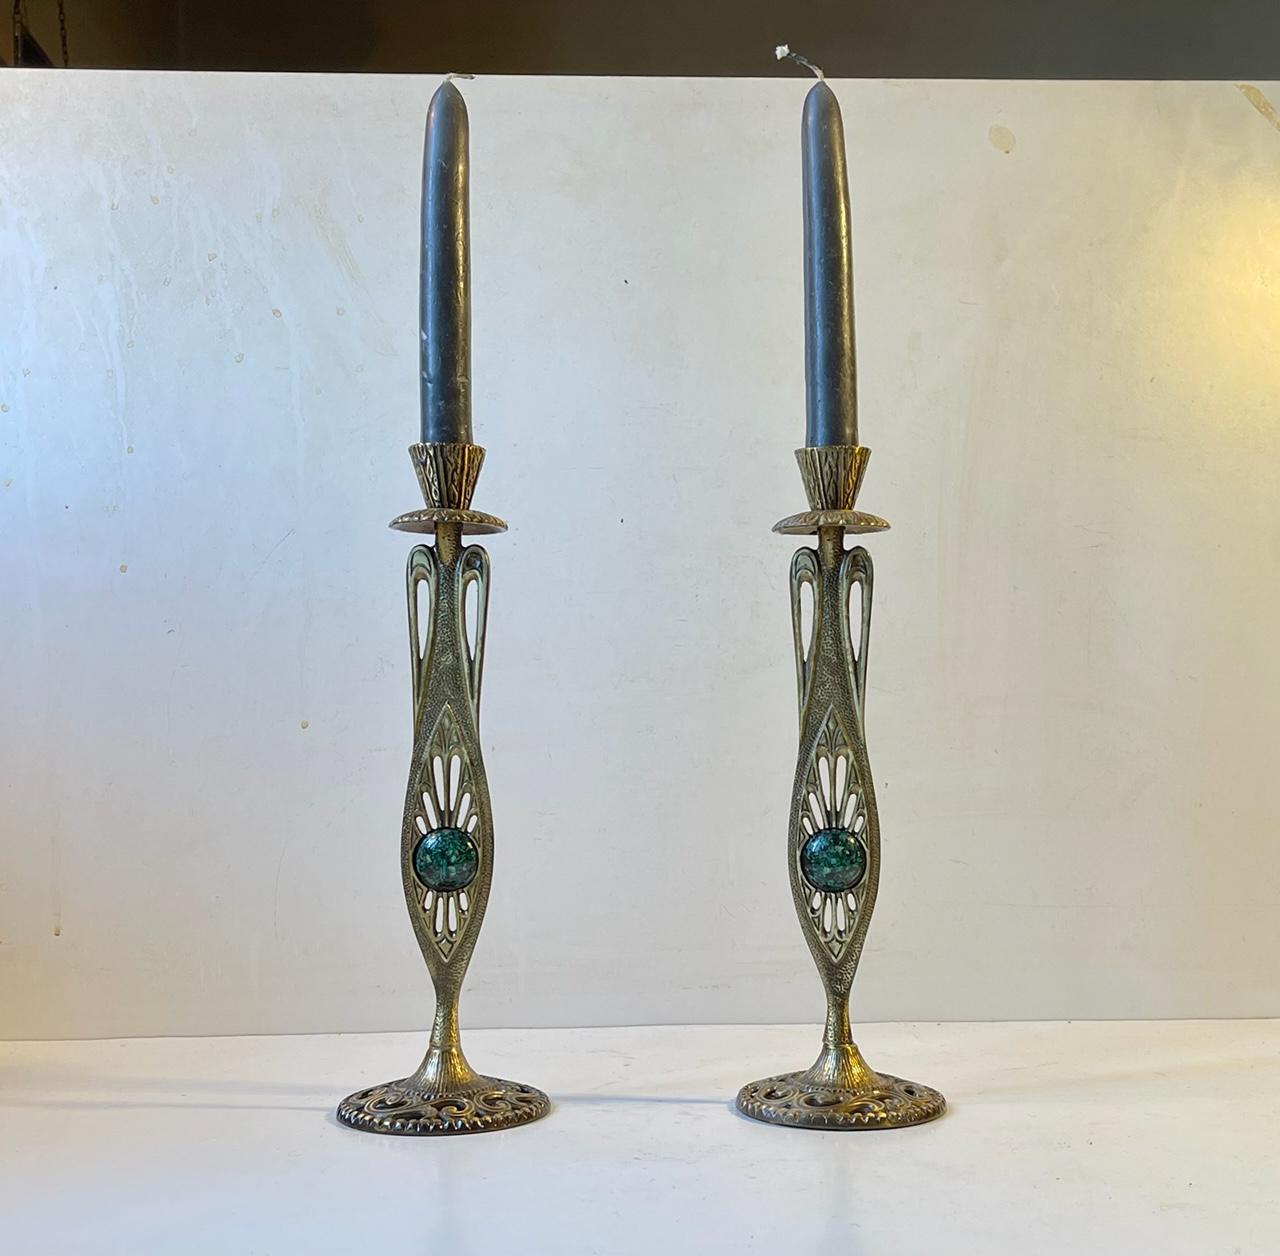 A pair of Art Nouveau / Arts & Crafts styled israeli candlesticks in cast ornamented and partially perforated brass. Set with polished oval pieces of Eliat. The Eilat stone is the name for a green inhomogeneous mixture of several secondary copper